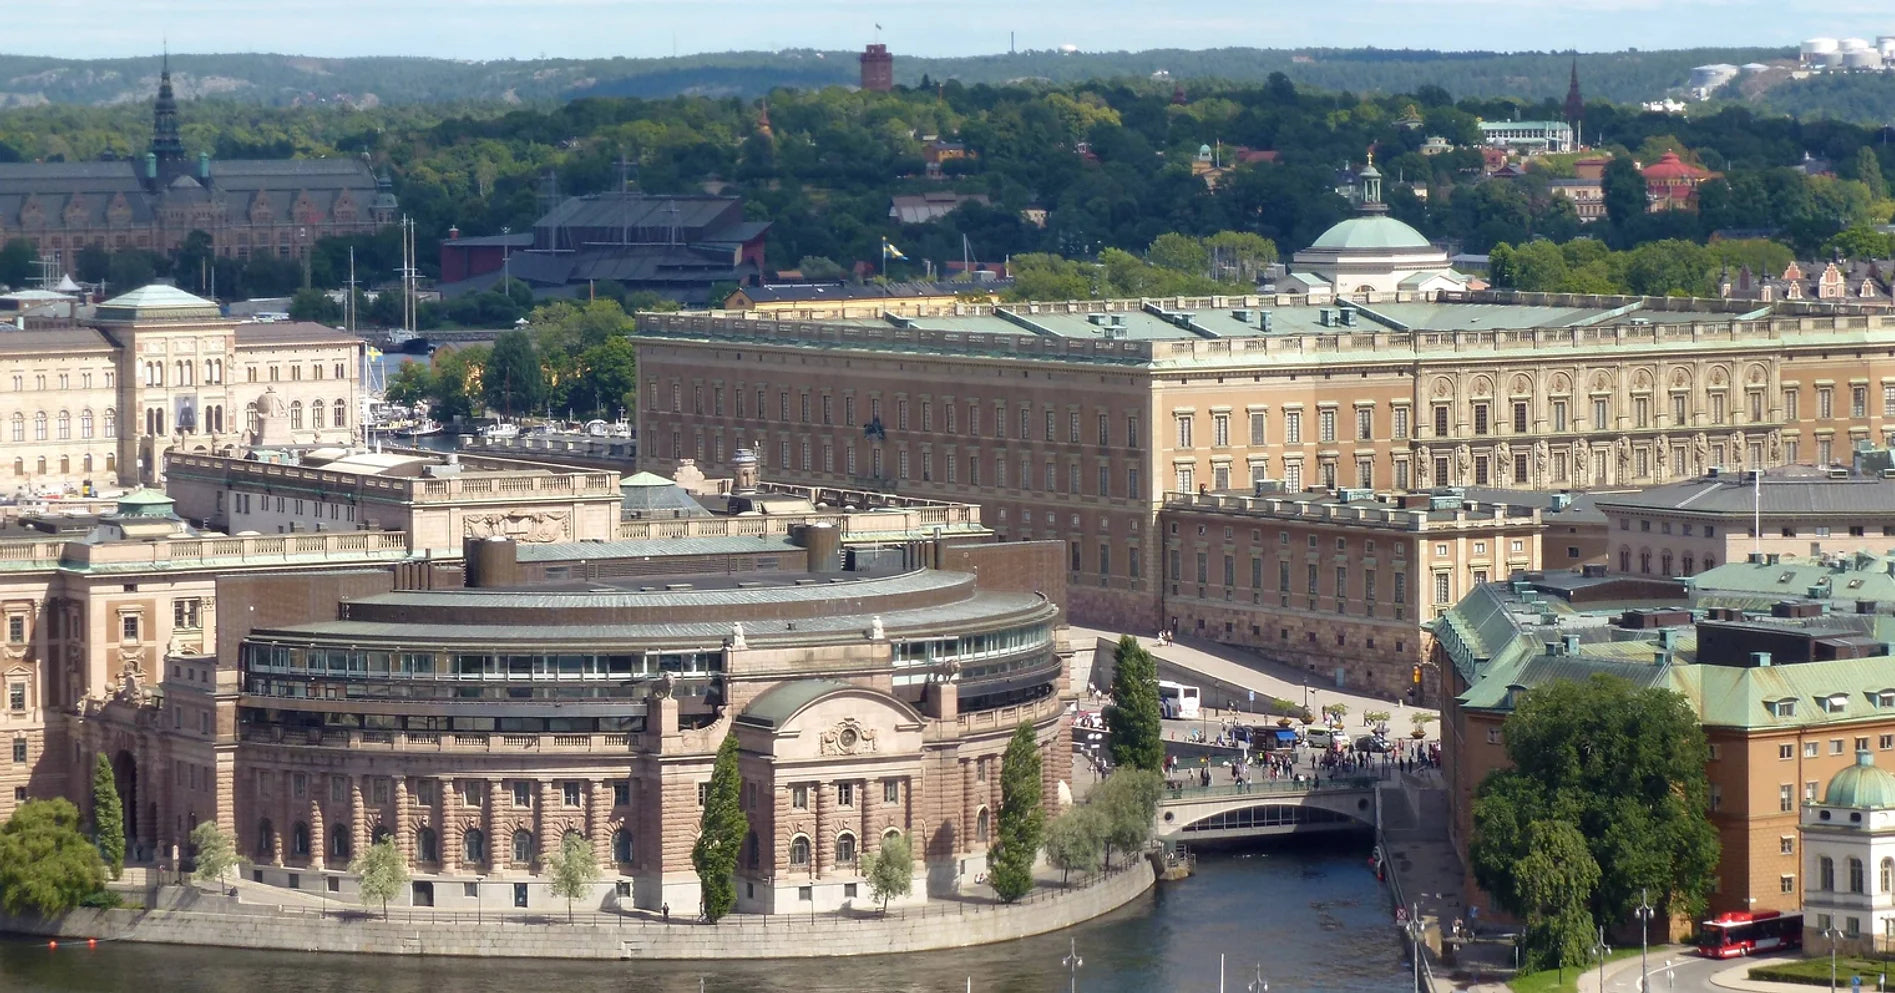 Stockholm - The Murder by The Parliament (Riksdagshuset)